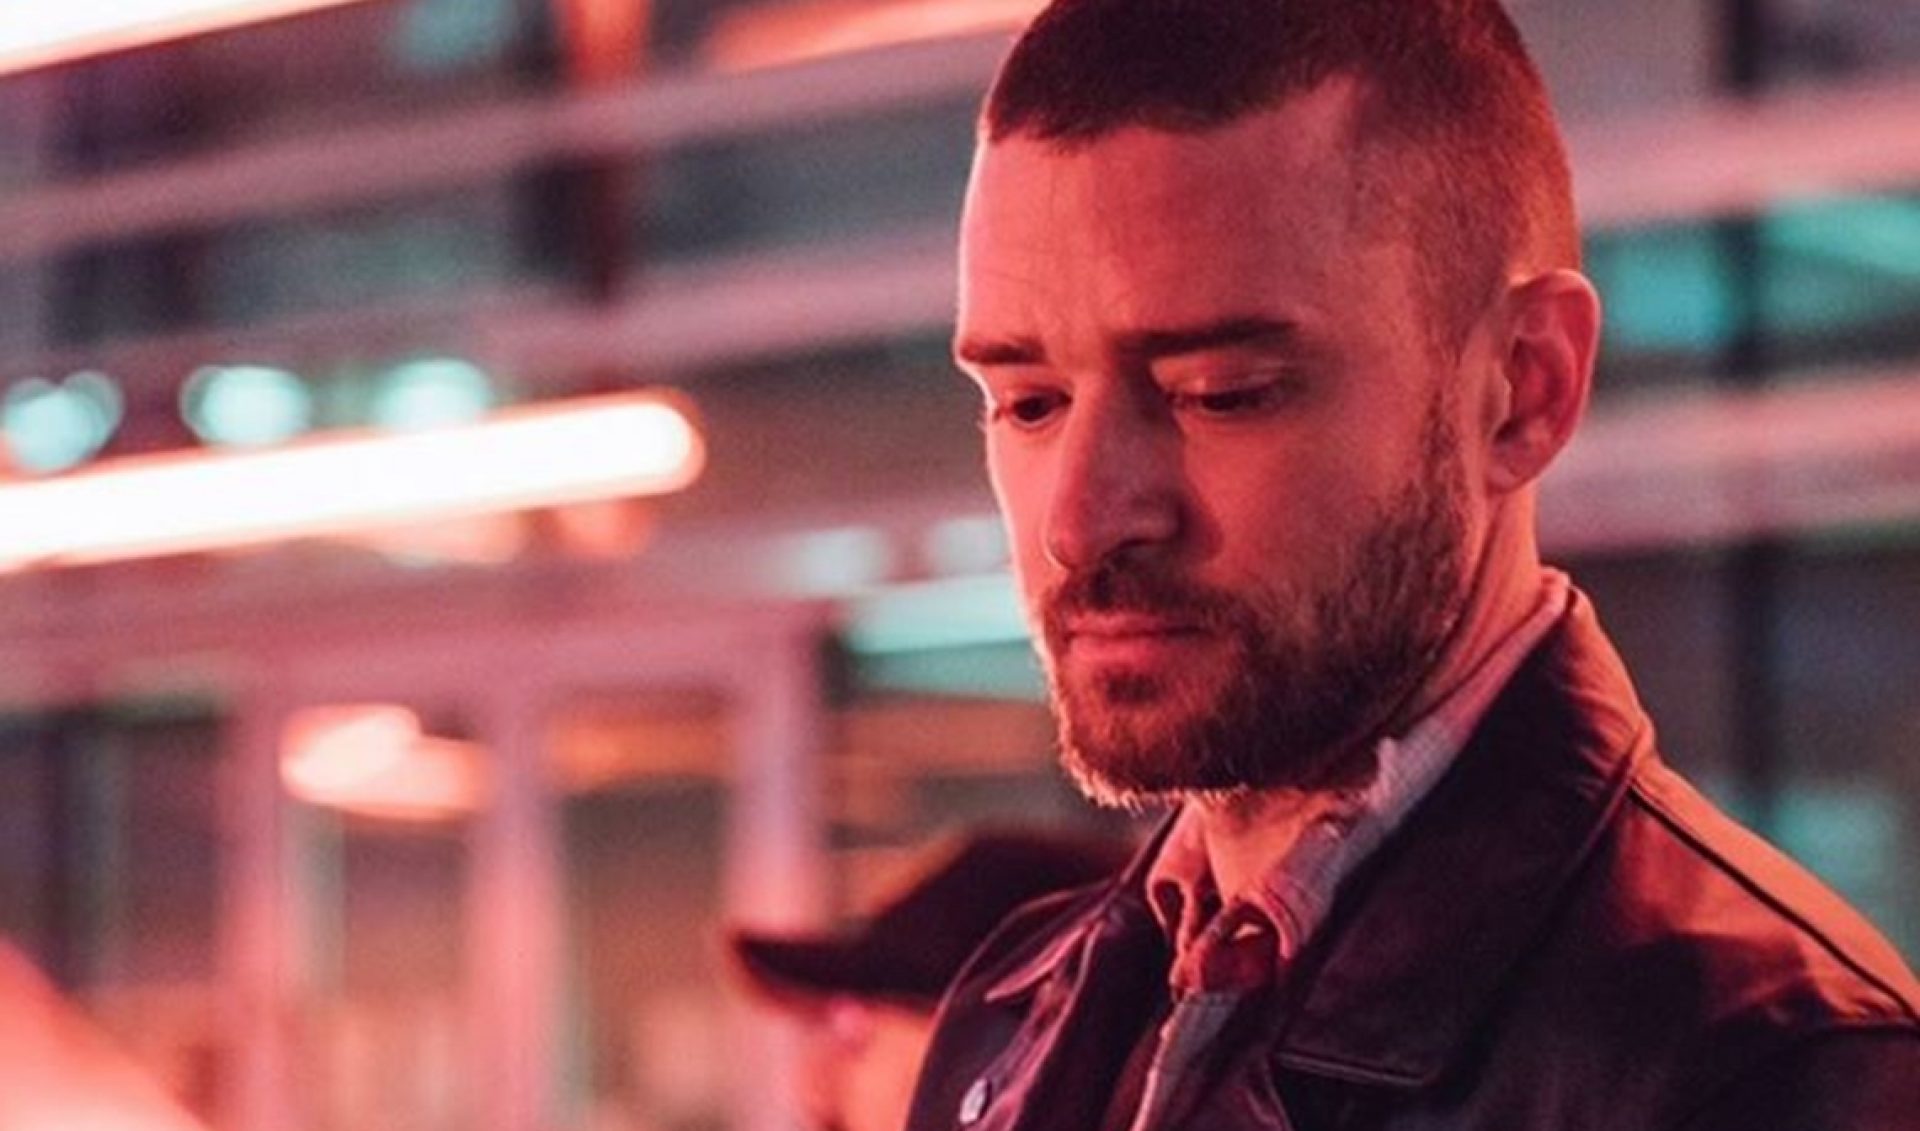 Fullscreen’s ‘Direct’ E-Commerce Division Inks Deals With Justin Timberlake, Trace Adkins, More